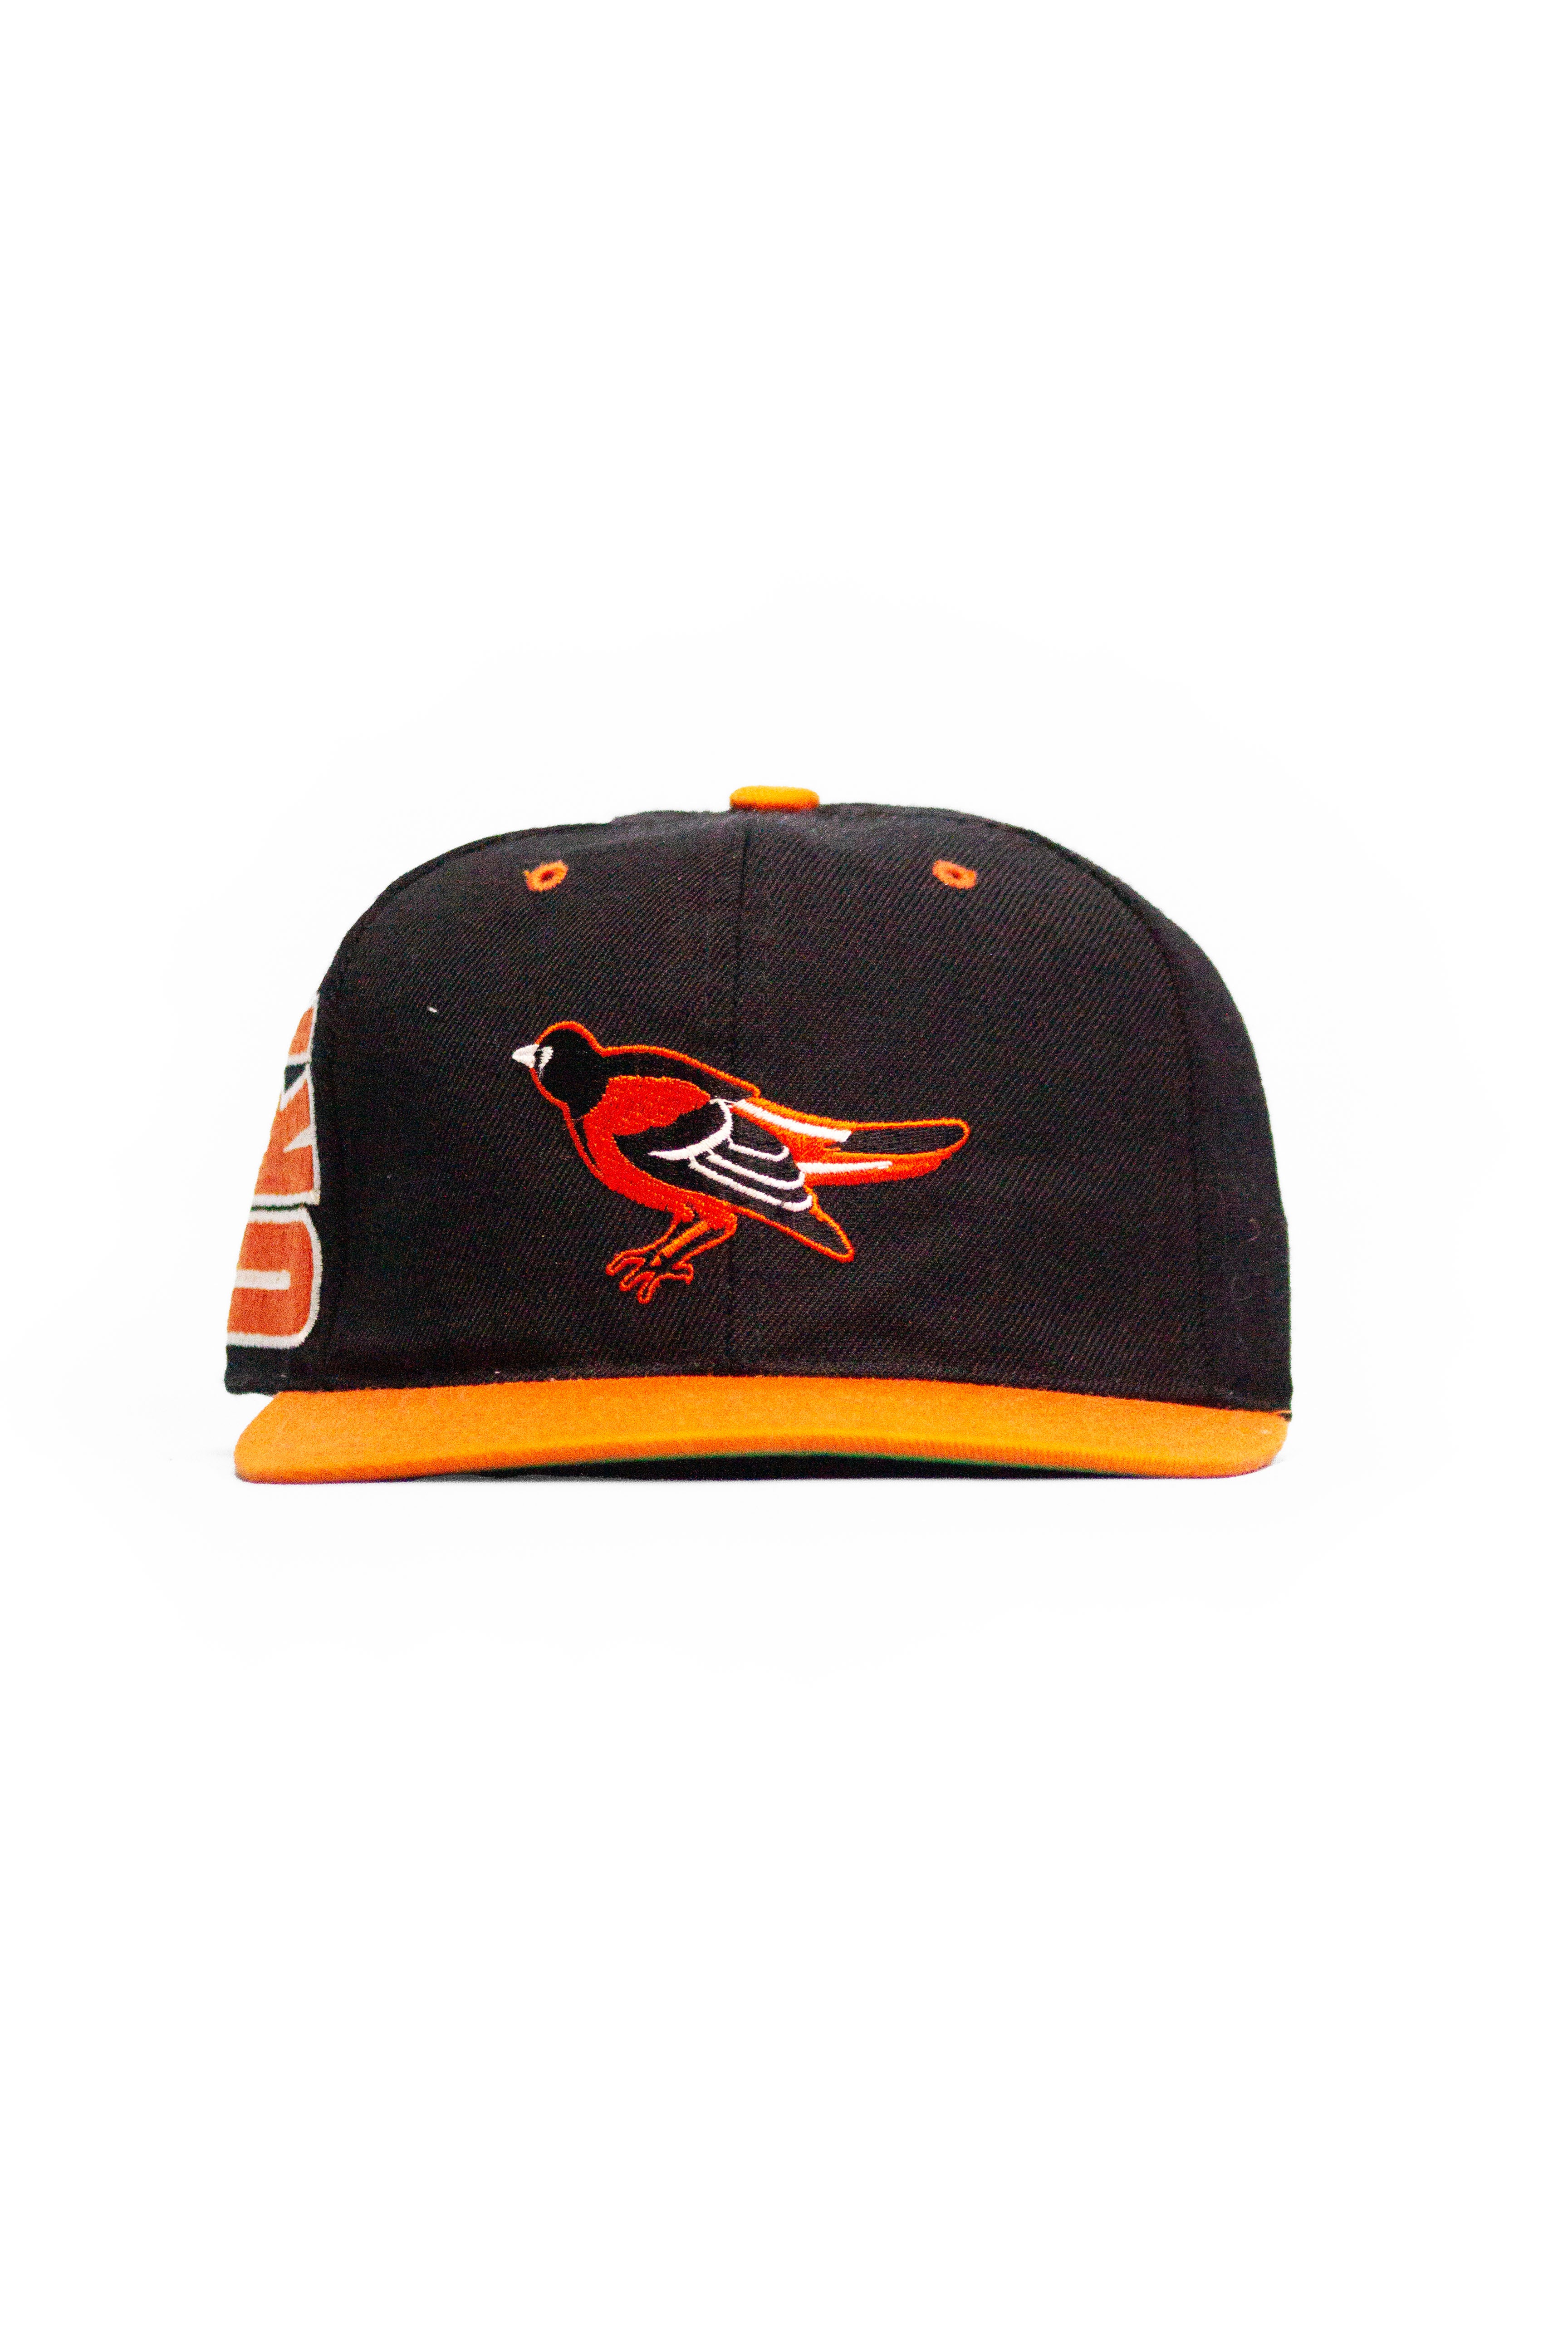 BALTIMORE ORIOLES VINTAGE 1980'S WOOL FITTED ADULT HAT MEDIUM